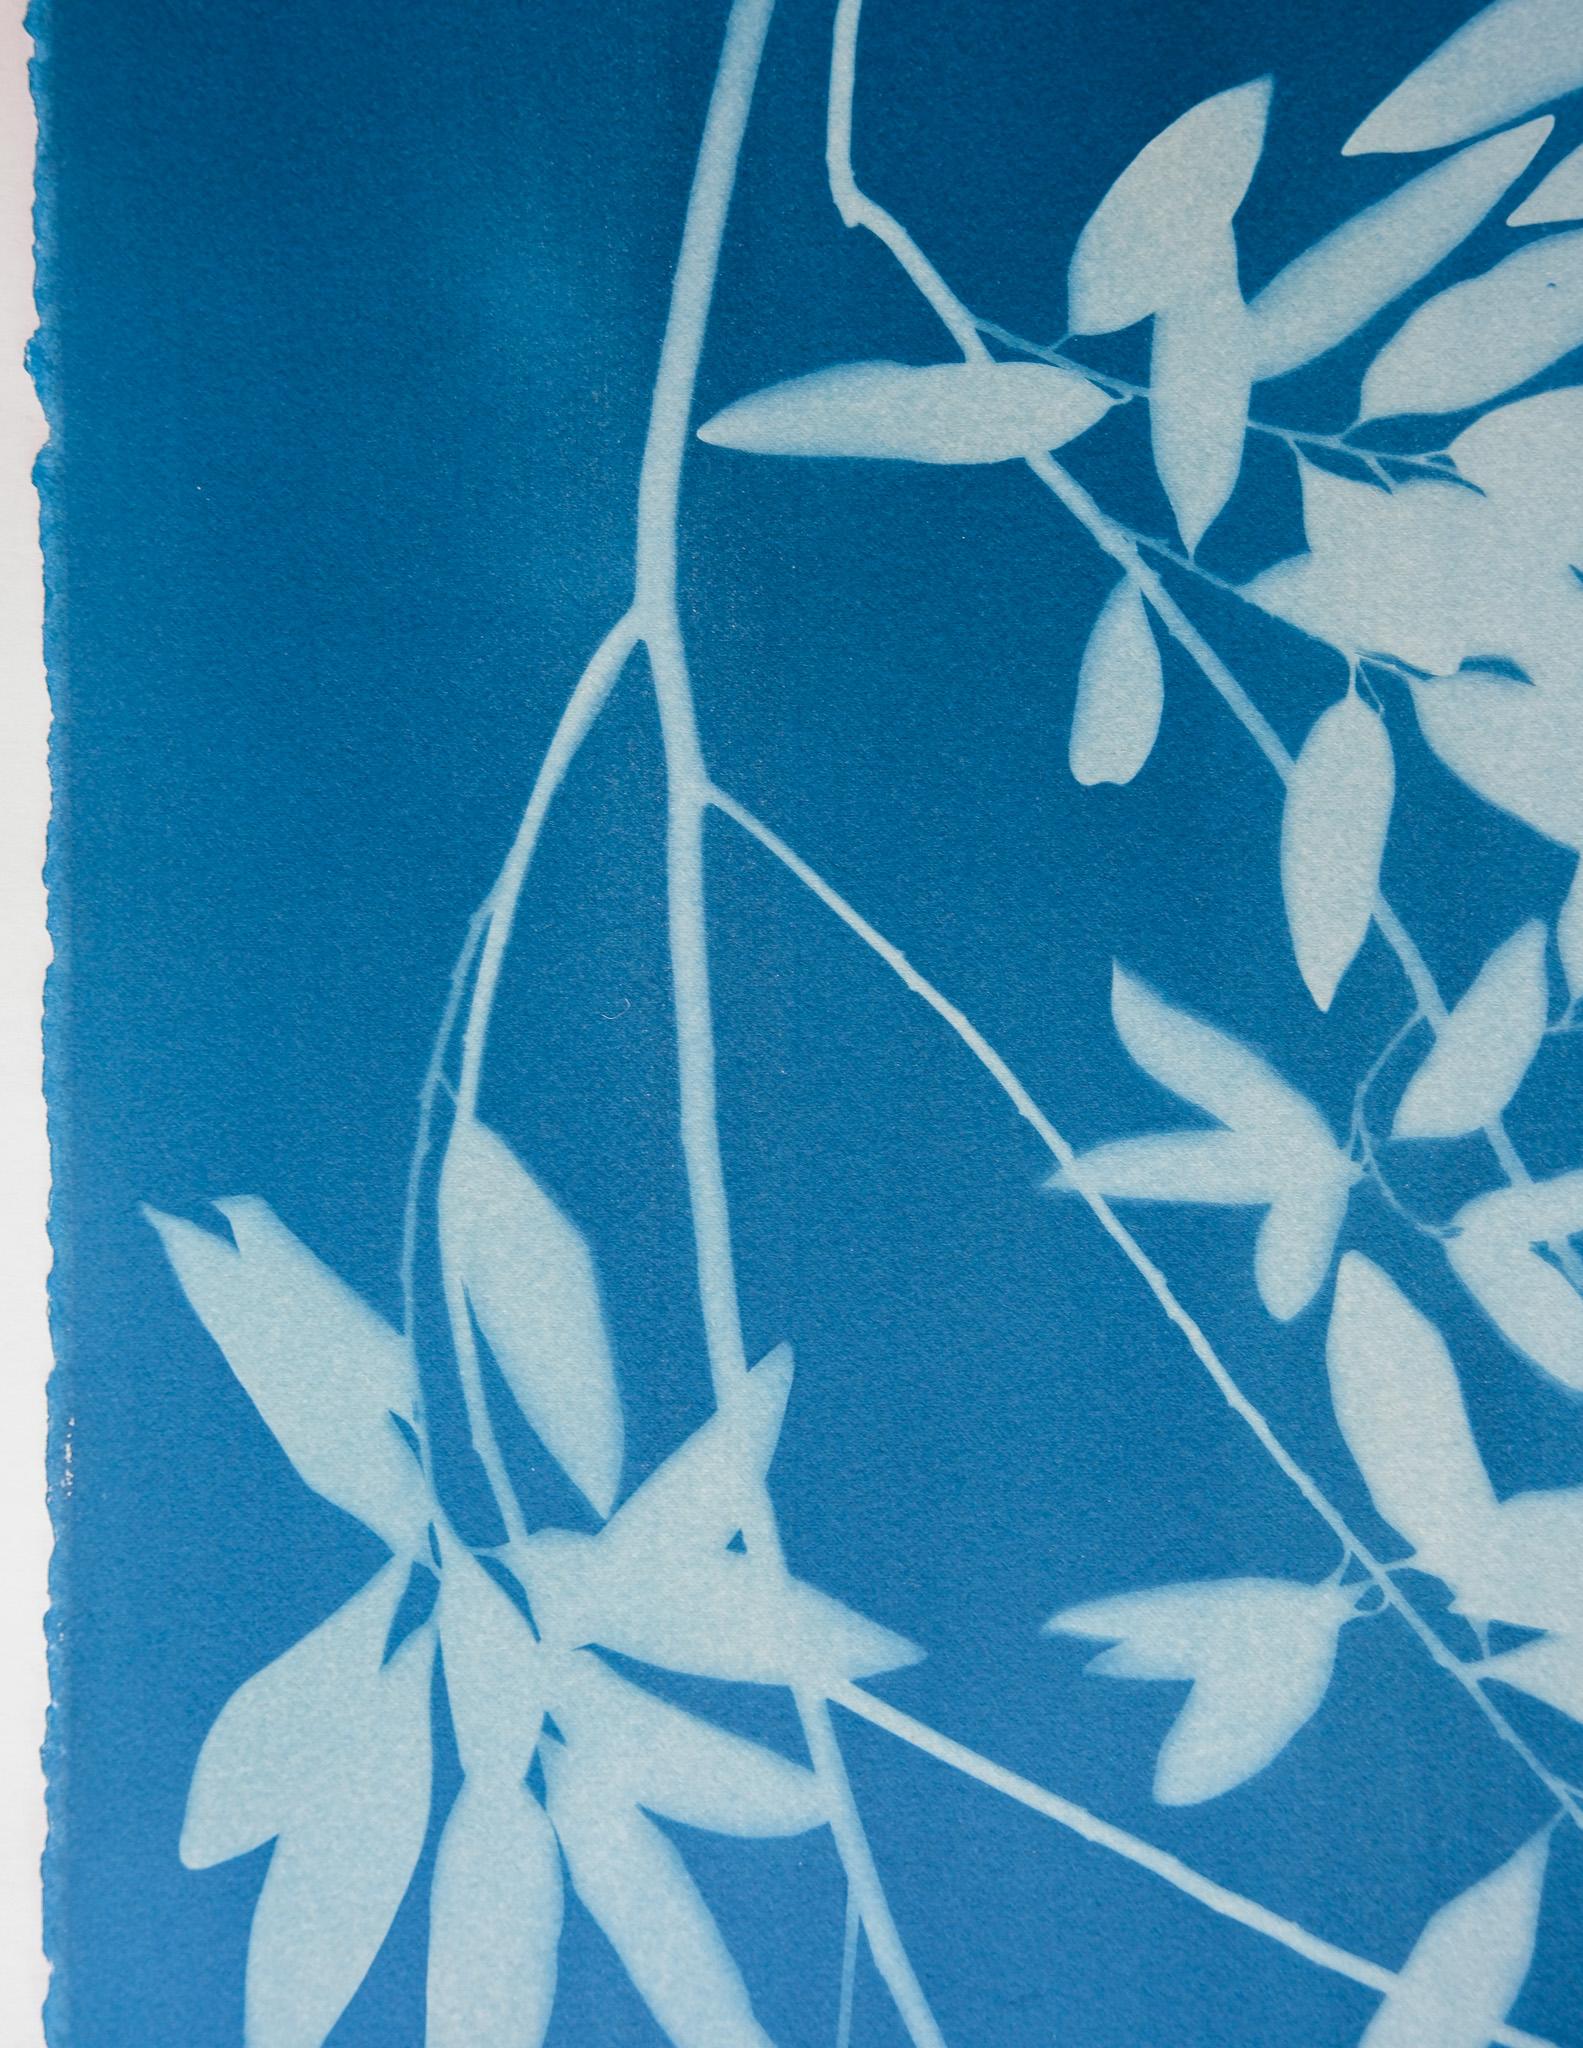 Bay Laurel Diptych (Hand-printed cyanotype, 40 x 52 inches combined) For Sale 1